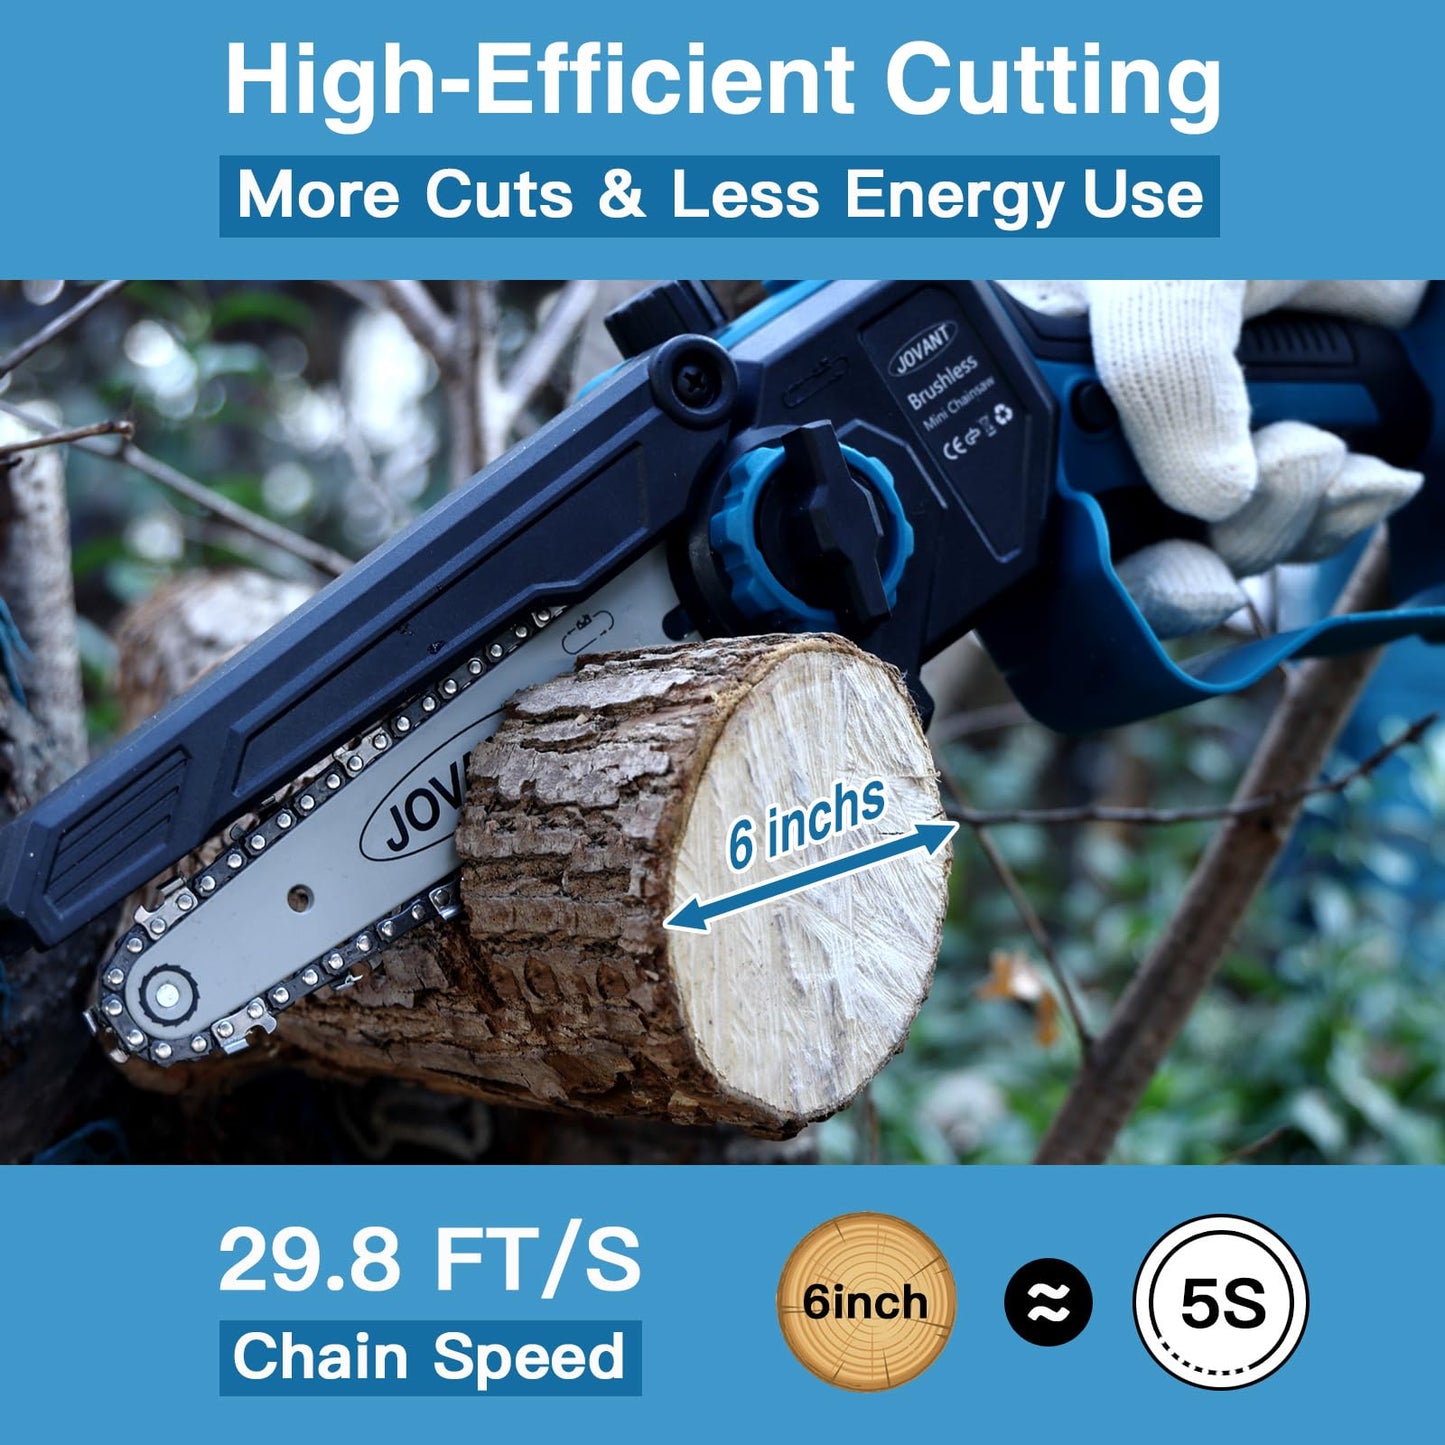 High-Efficient Cutting More Cuts & Less Energy Use 29.8 FT/S Chain Speed 6inch log in 5S